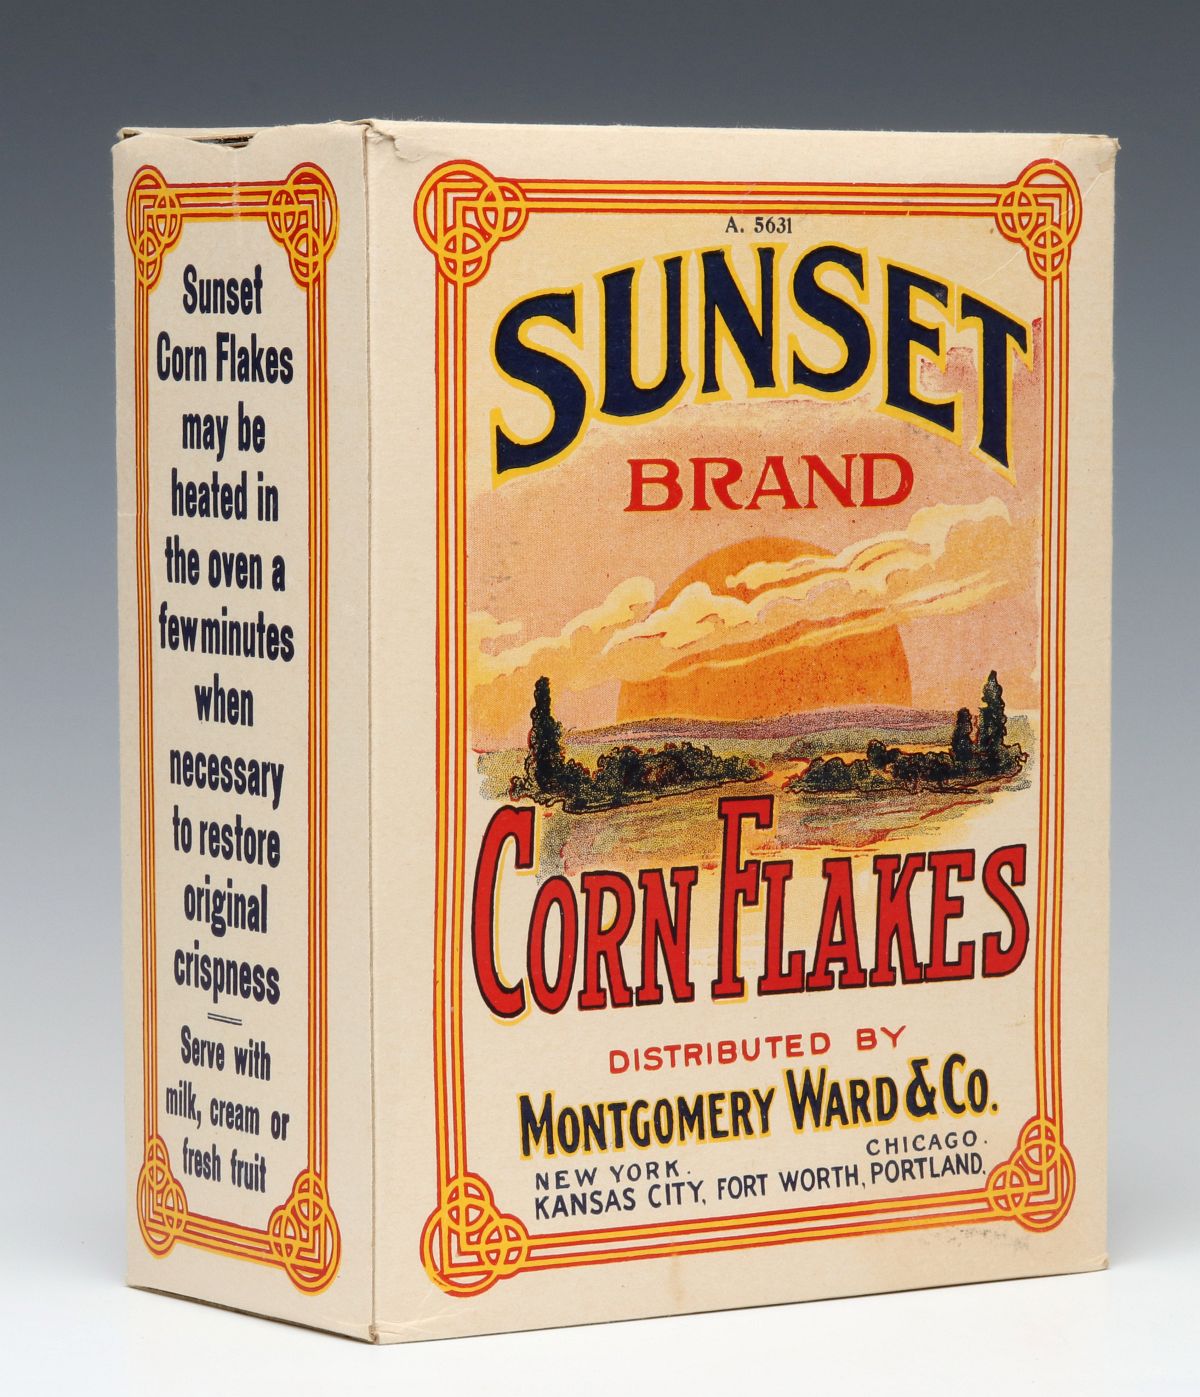 A SUNSET BRAND CORN FLAKES CONTAINER